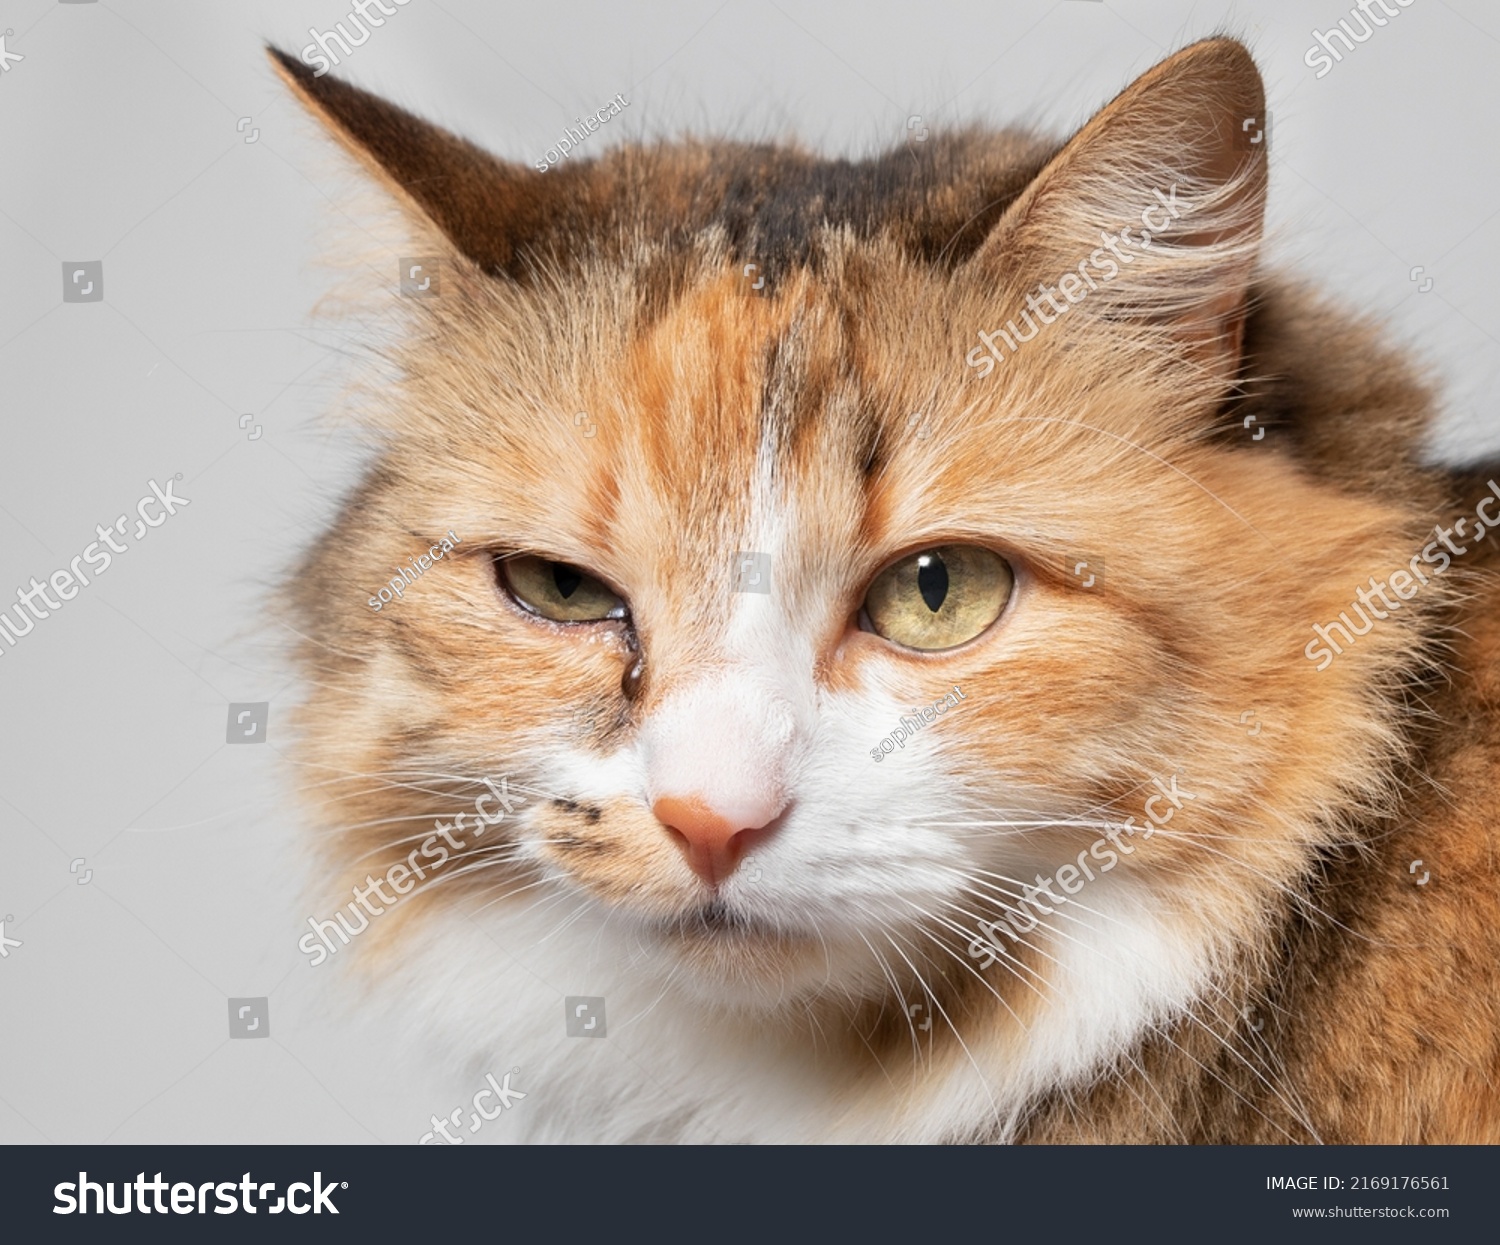 Cat with eye infection looking at camera. Front view of cat with one eye glassy, teary and discolored. Cat eye half closed from pain. Conjunctivitis, feline herpes virus or allergy. Selective focus. #2169176561